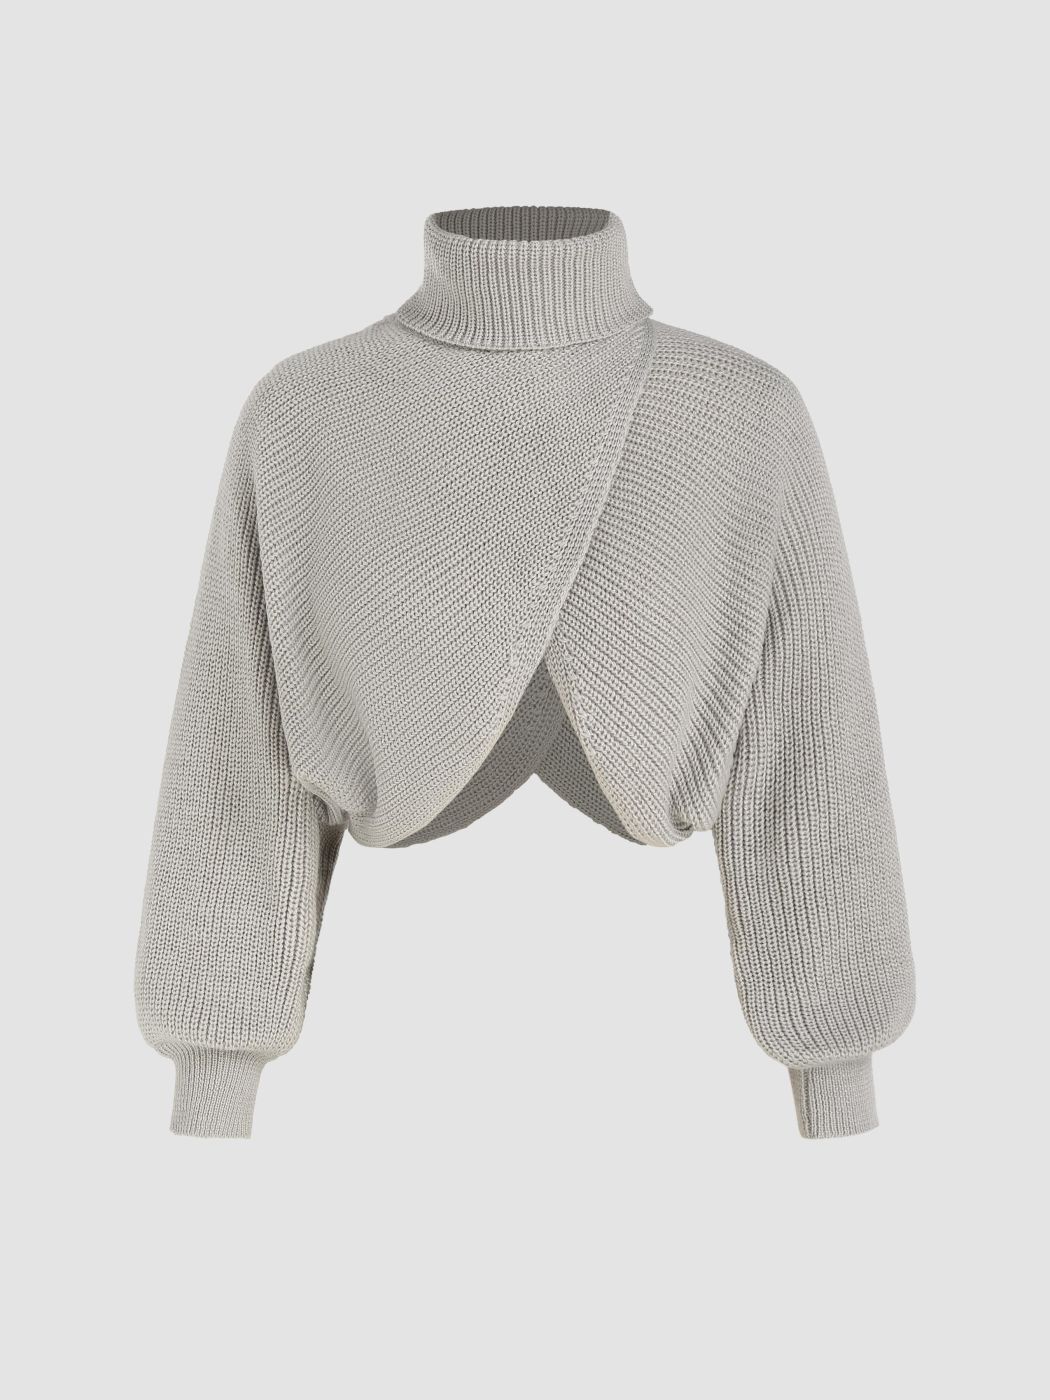 HIGH NECK SOLID KNITTED LONG SLEEVE CROP SWEATER